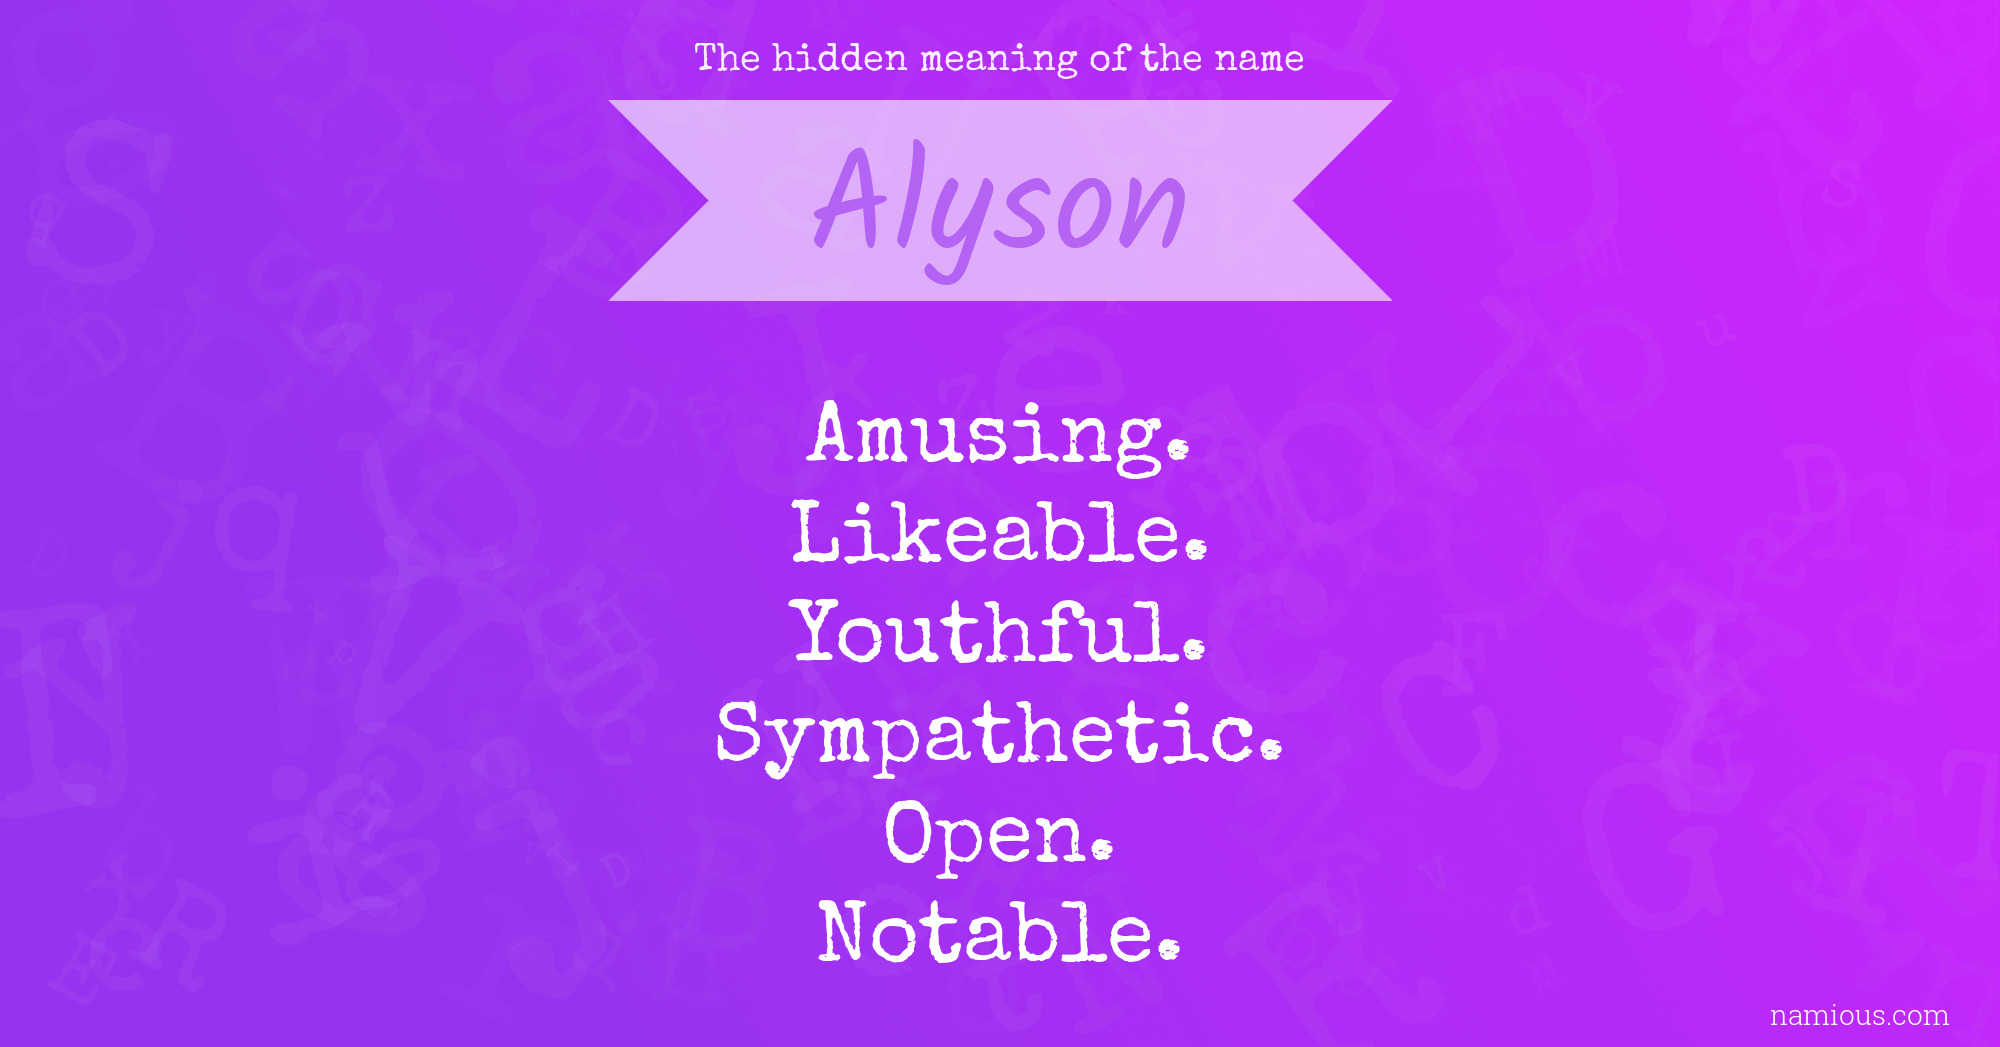 The hidden meaning of the name Alyson